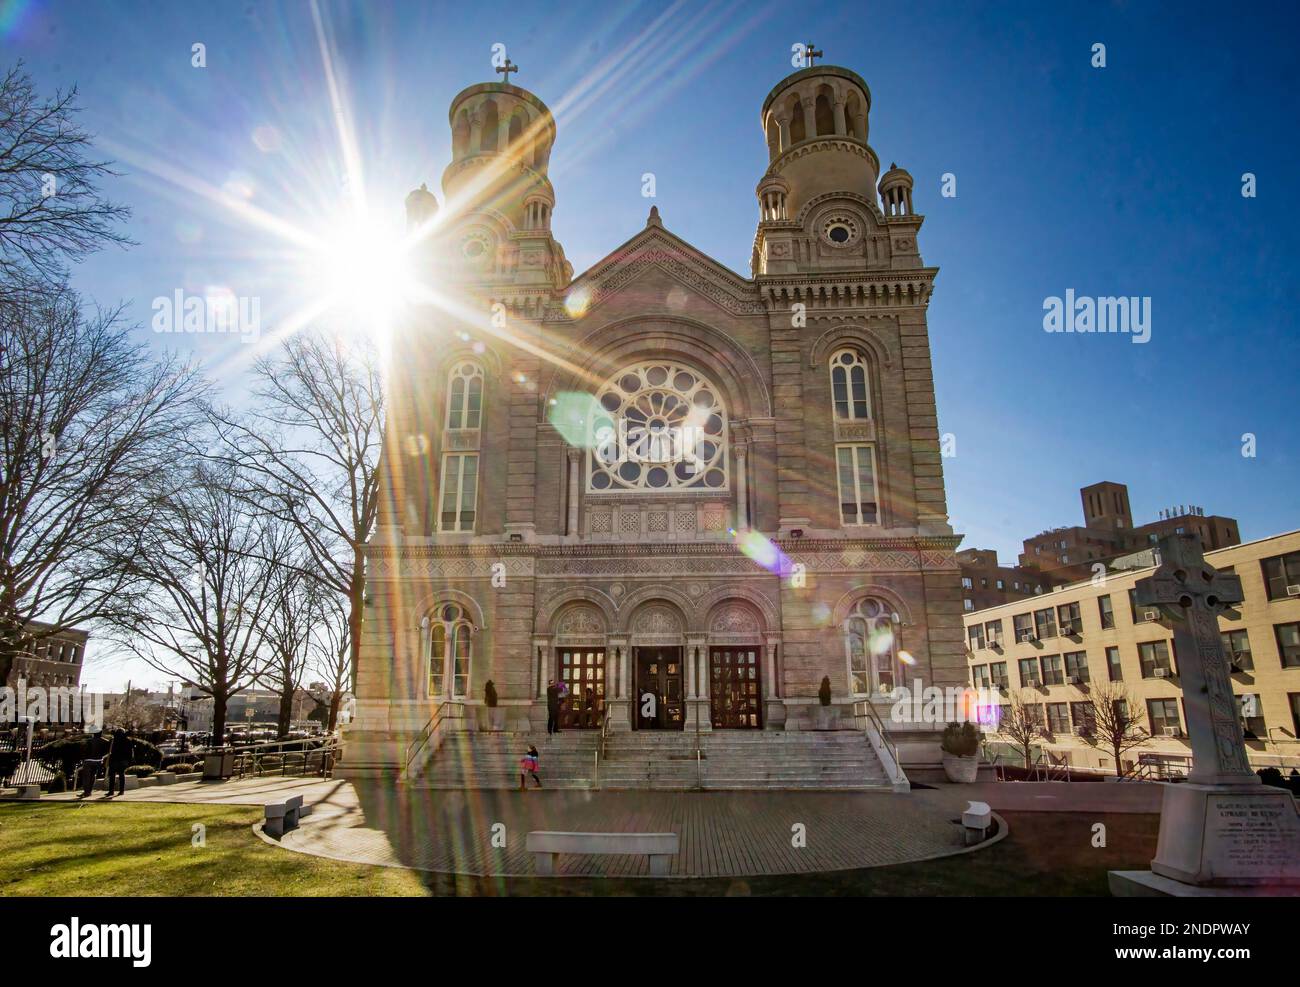 Bronx, NY - USA - Feb 11, 2023 Head on view of the Byzantine Revival-style St. Raymond's Church, a parish church in the Bronx. Designed by George H. S Stock Photo